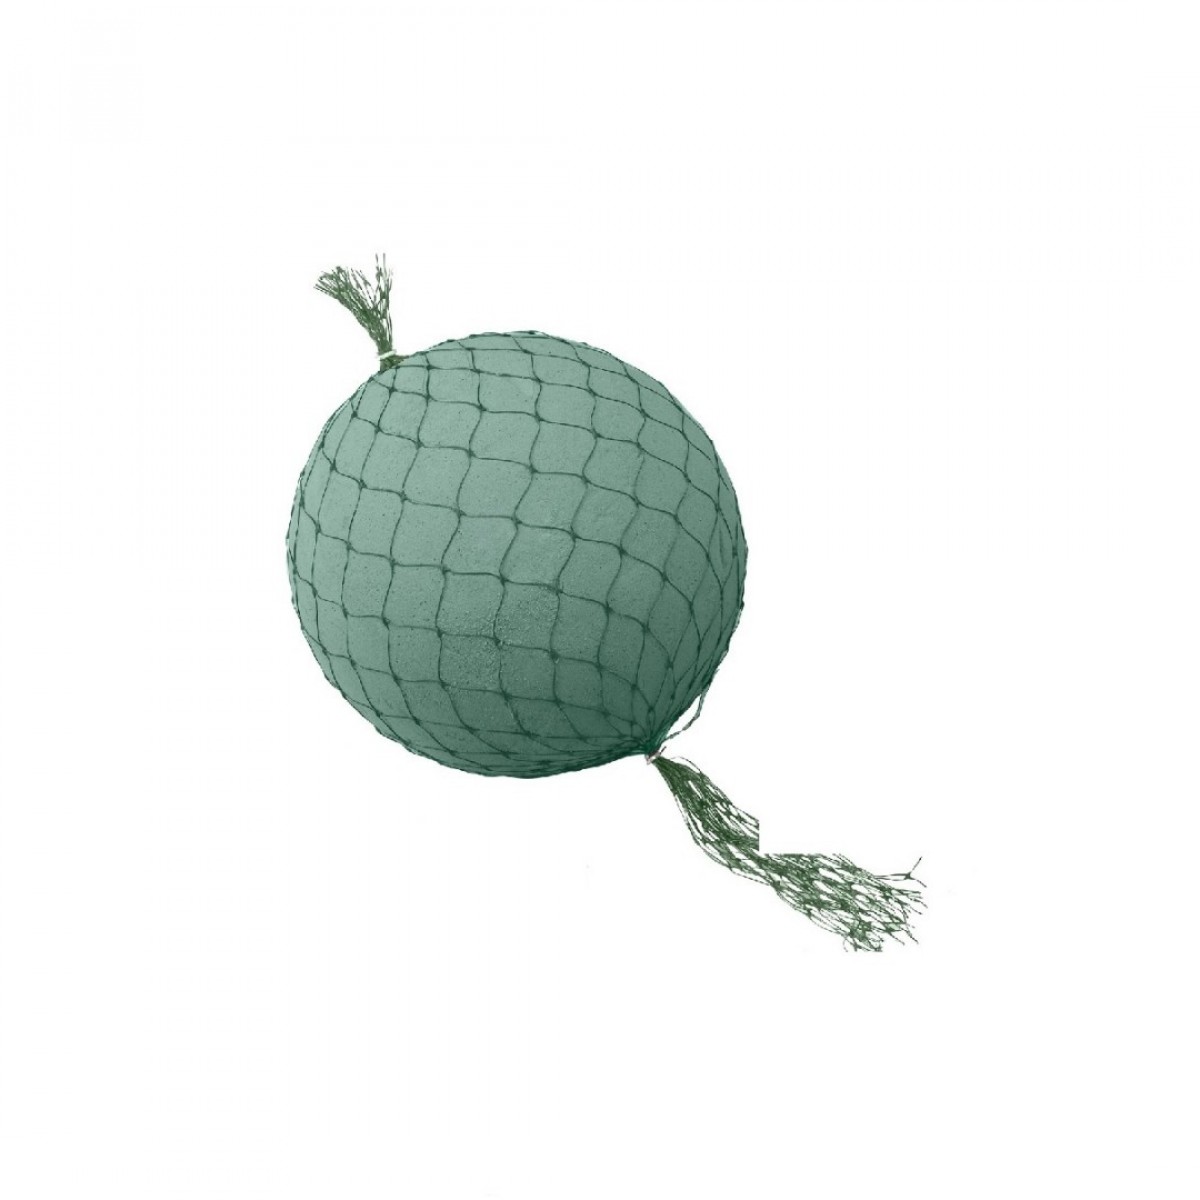 75mm (48 No) Oasis Floral Foam Spheres with Net